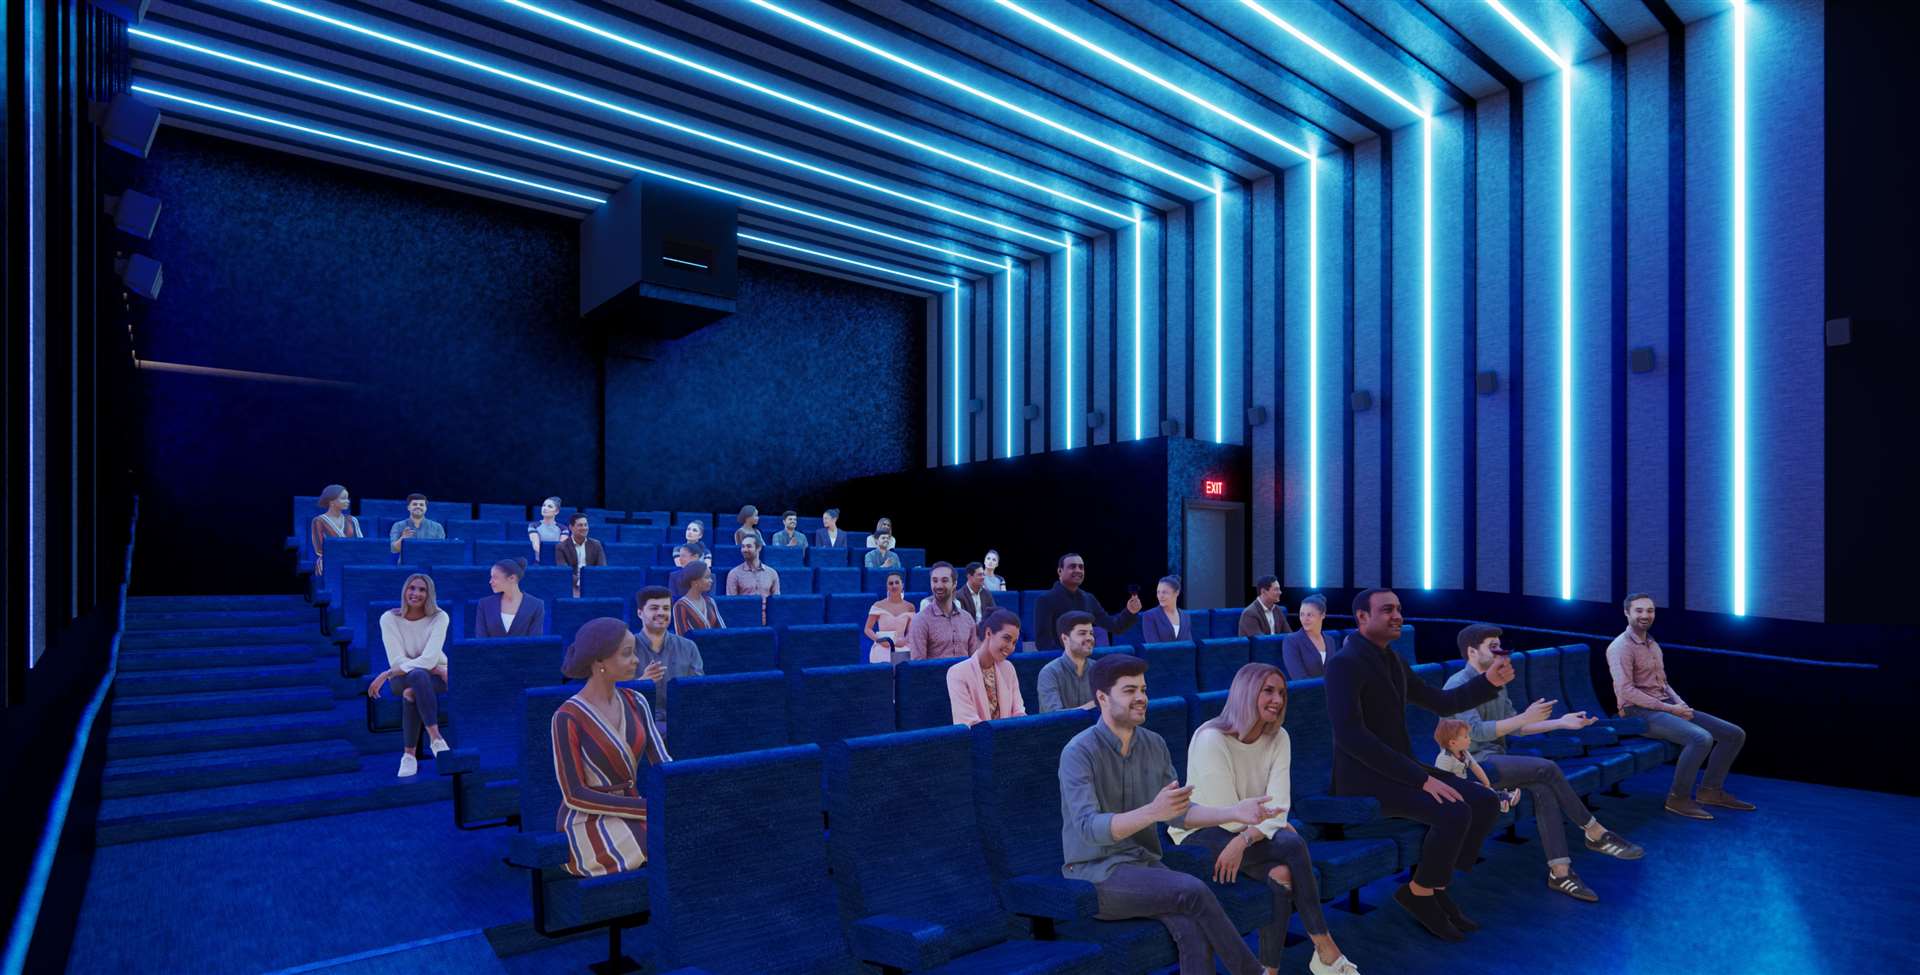 An artist's impression showing how the cinema could look